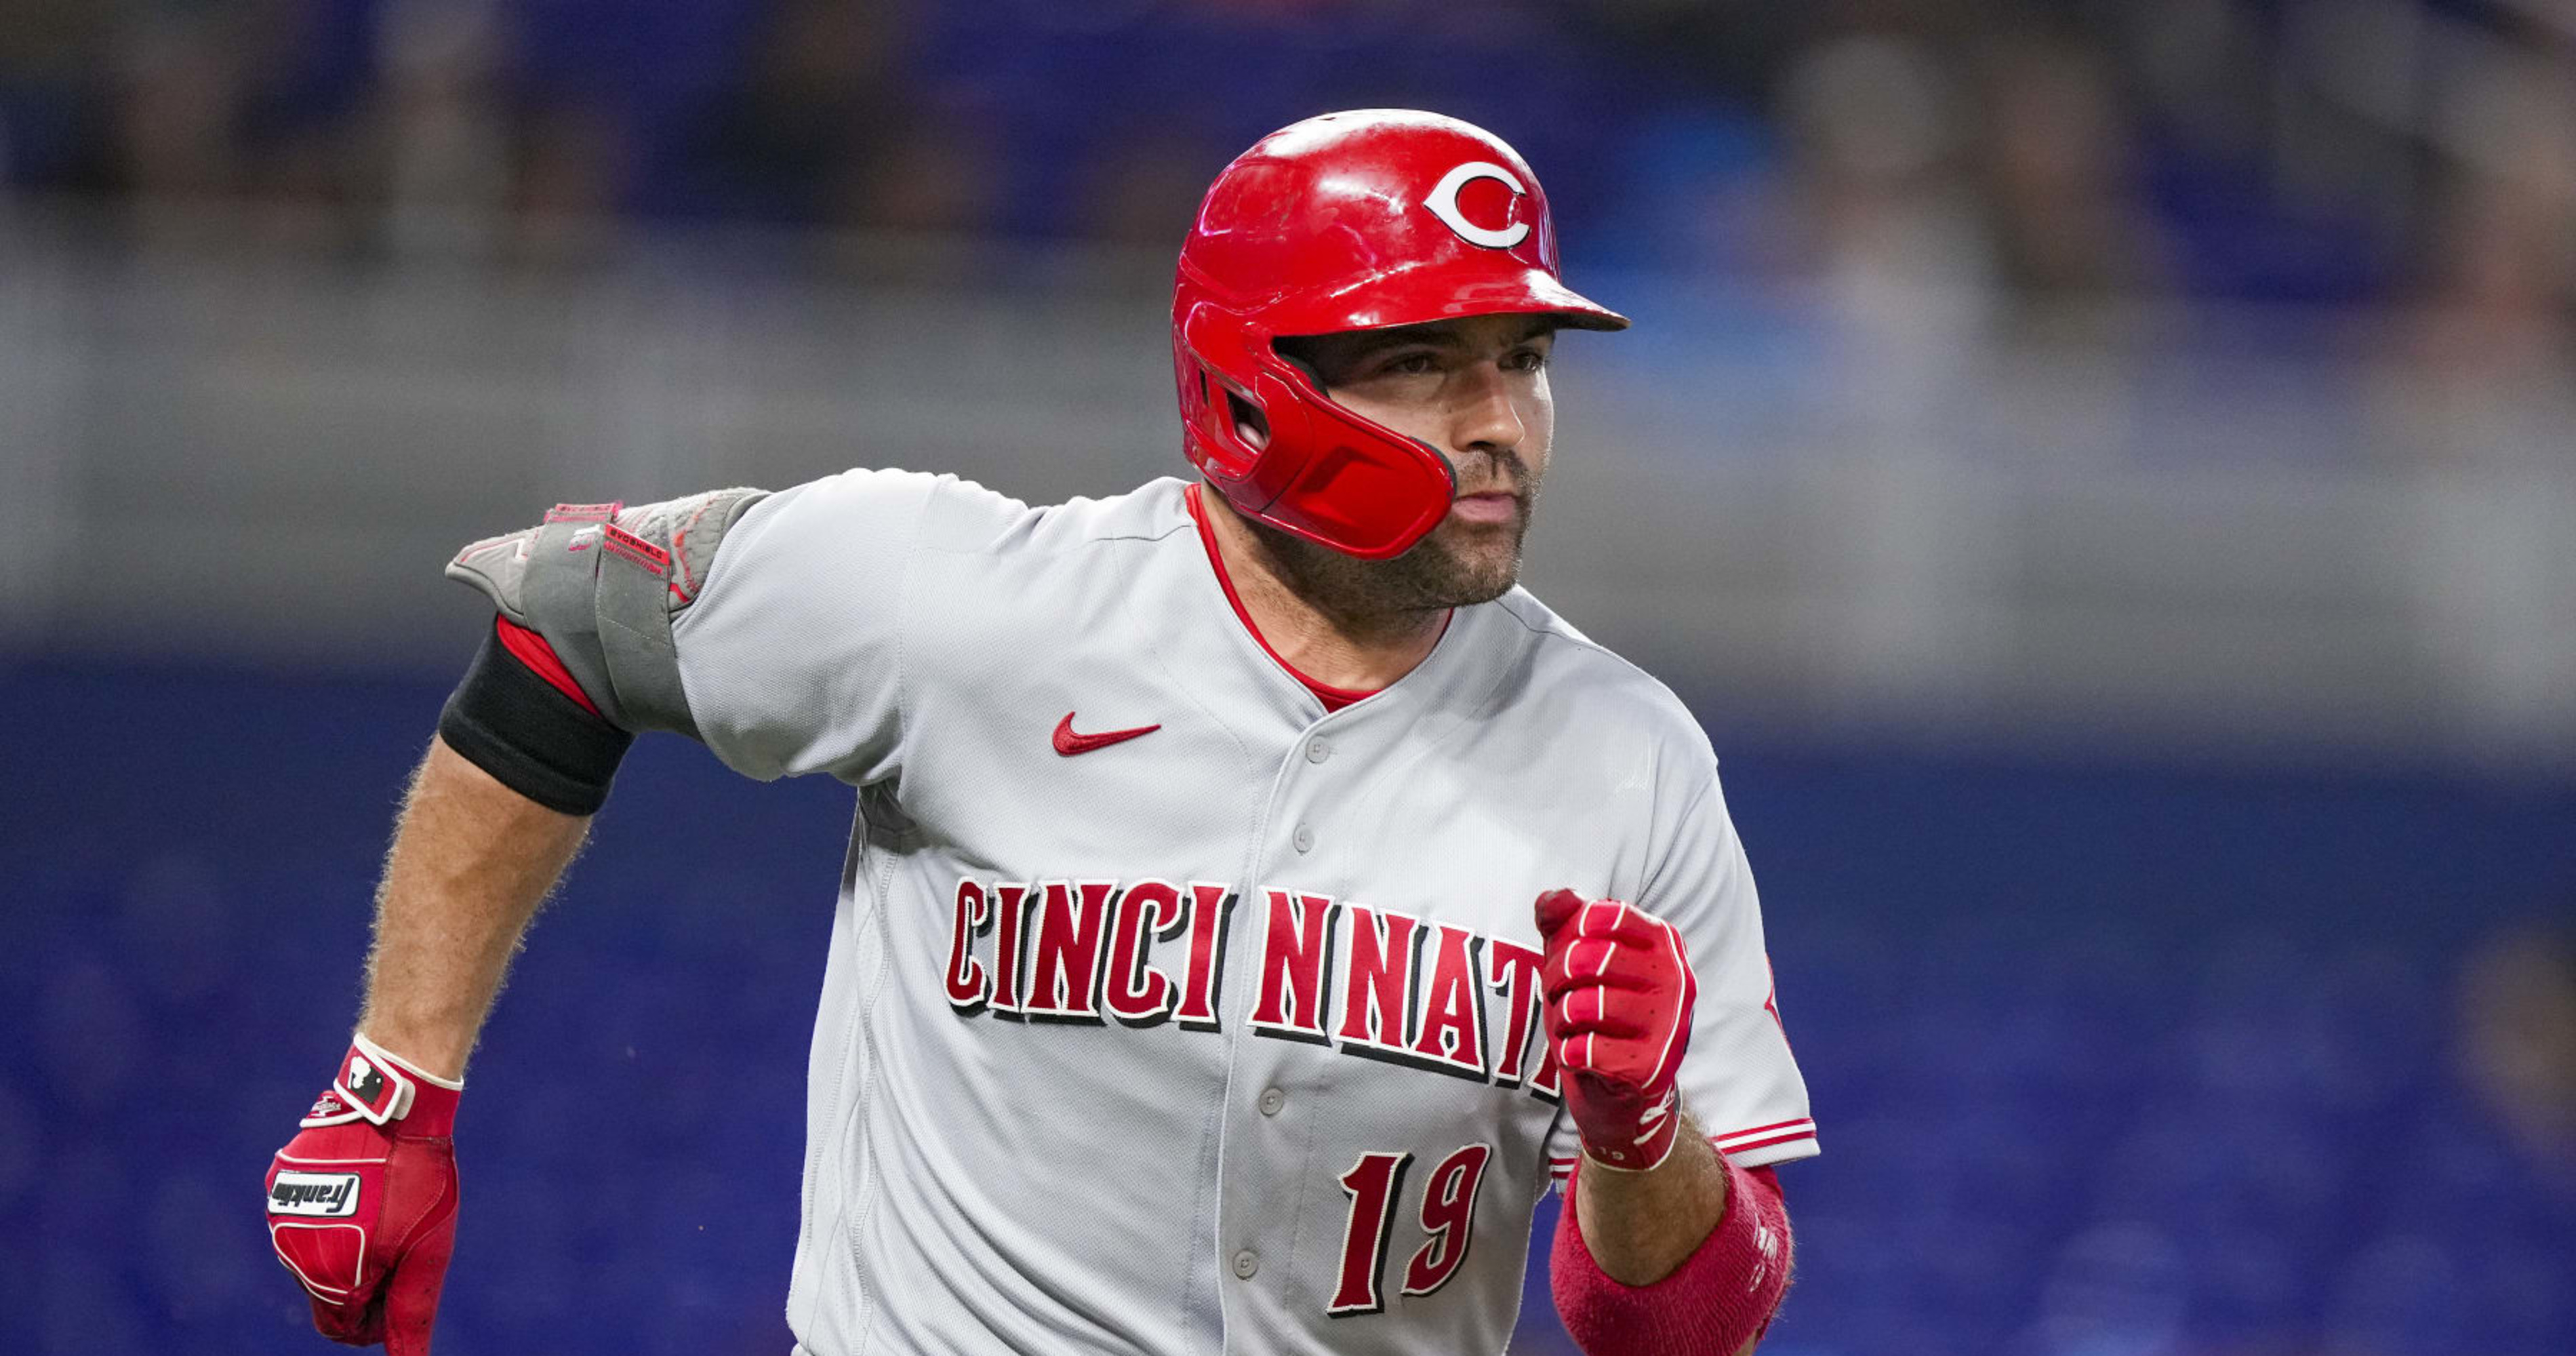 Reds’ Joey Votto Shares Excitement of Playing in Field of Dreams Game vs. Cubs